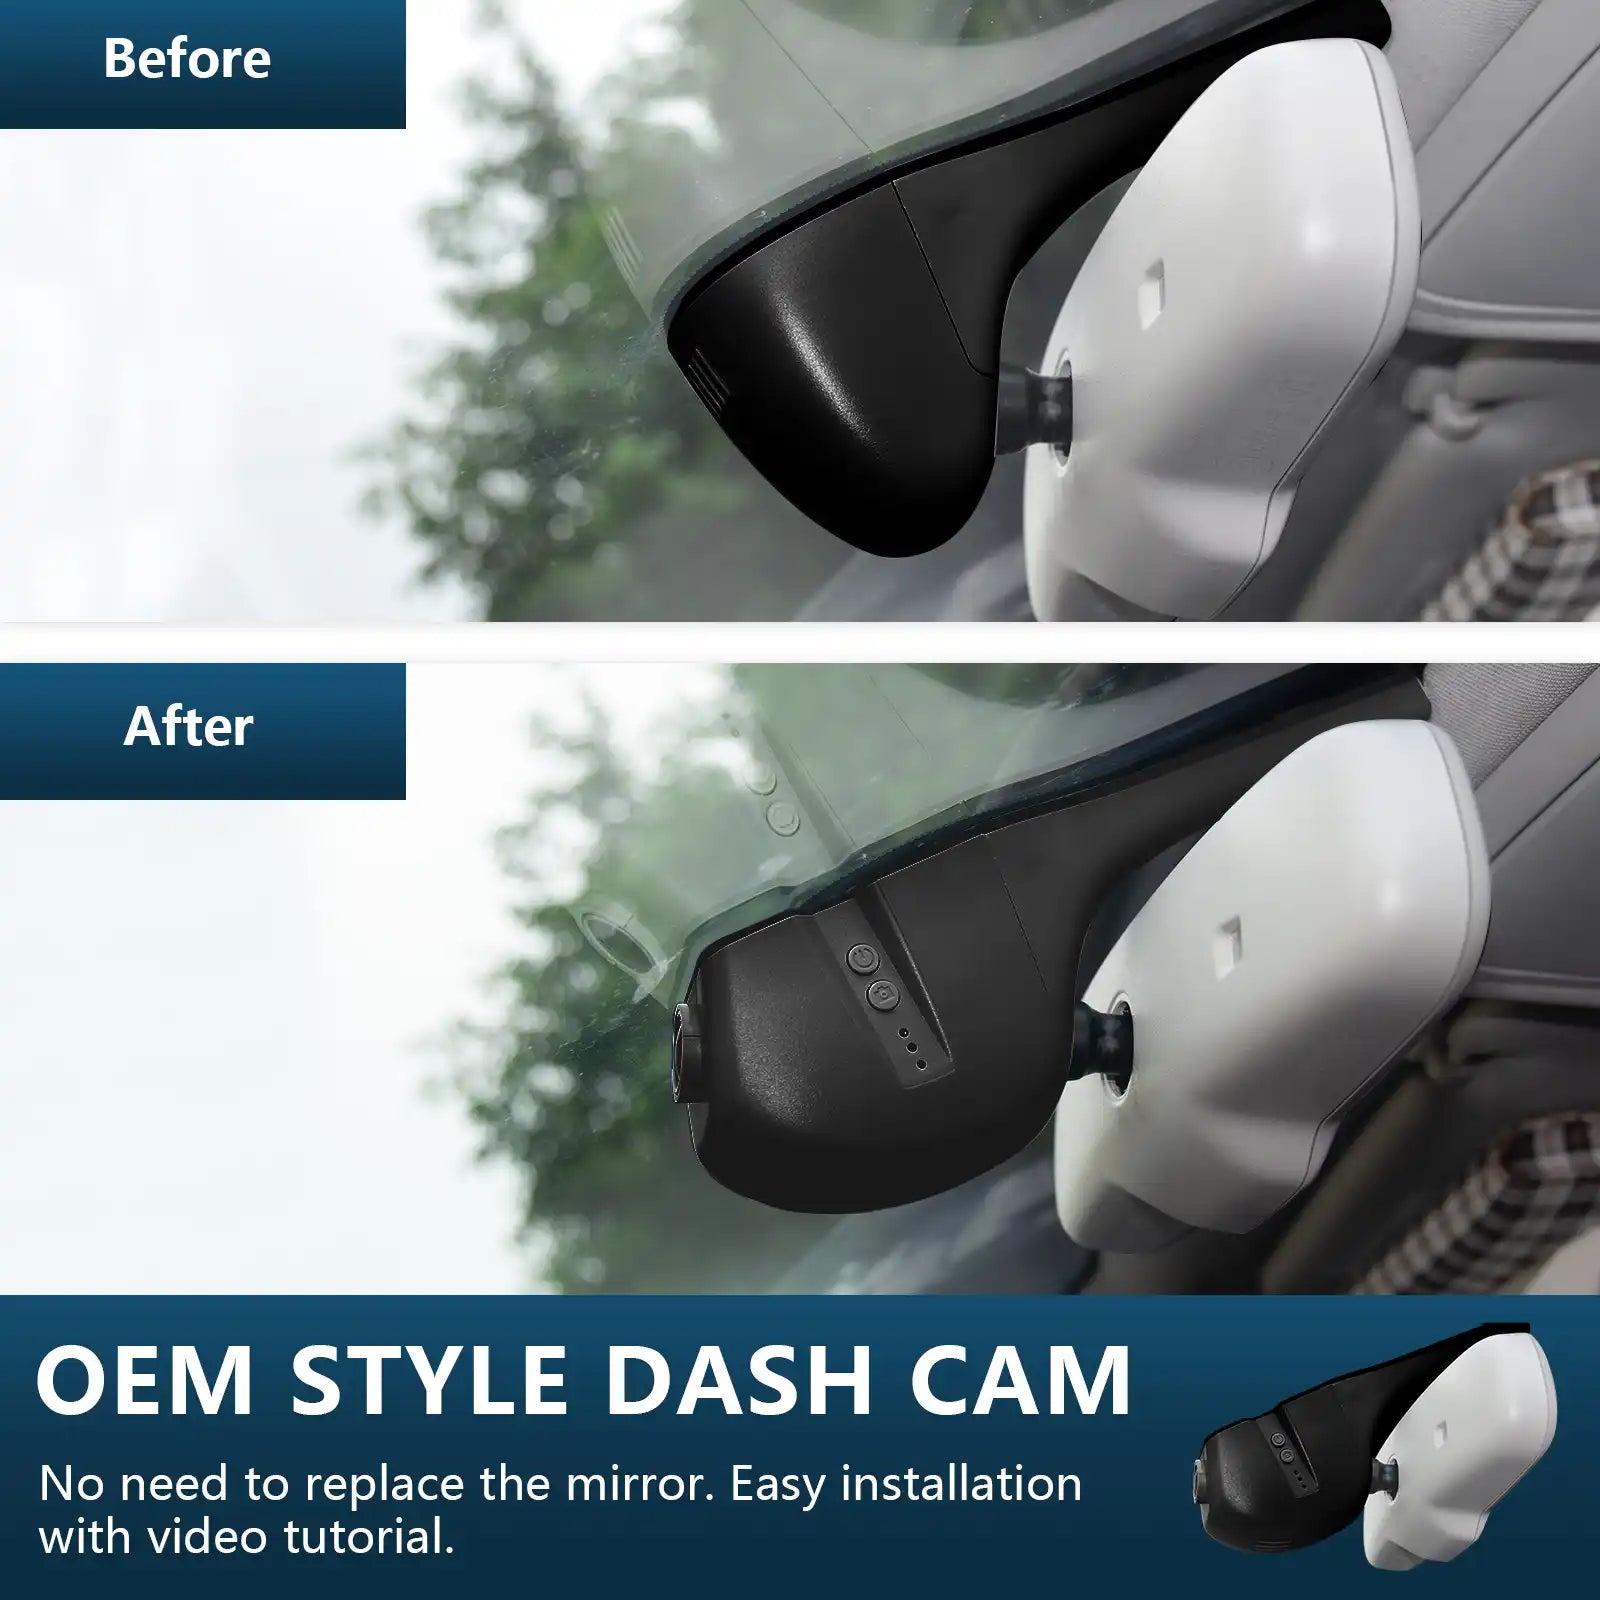 dash cam before and after installation 